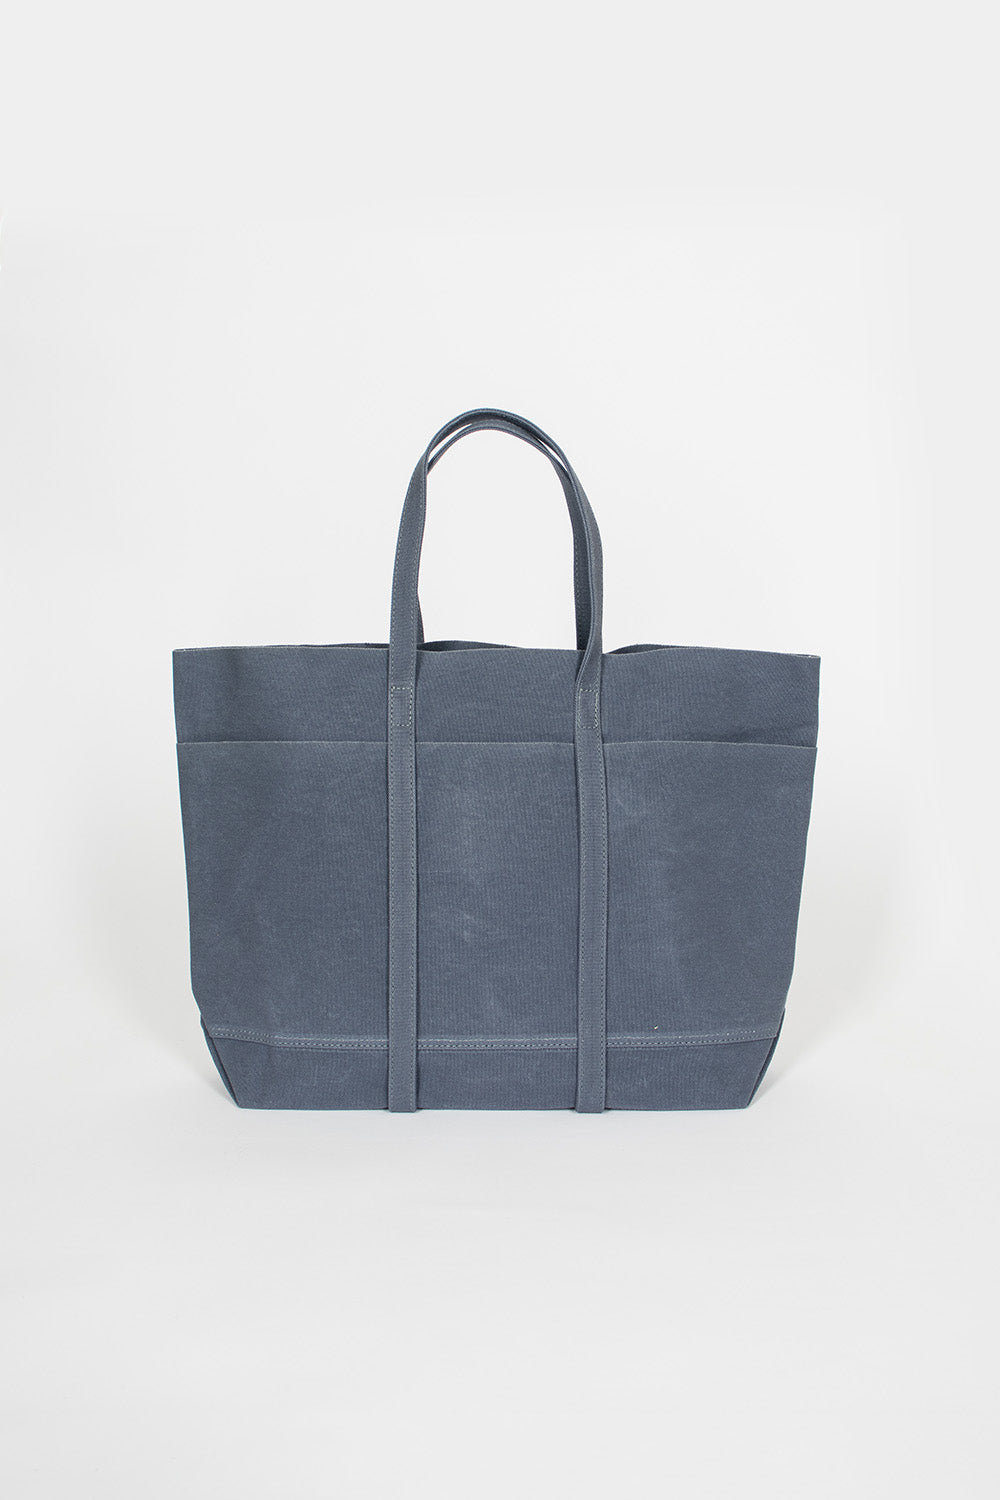 Light Ounce Tote Grey